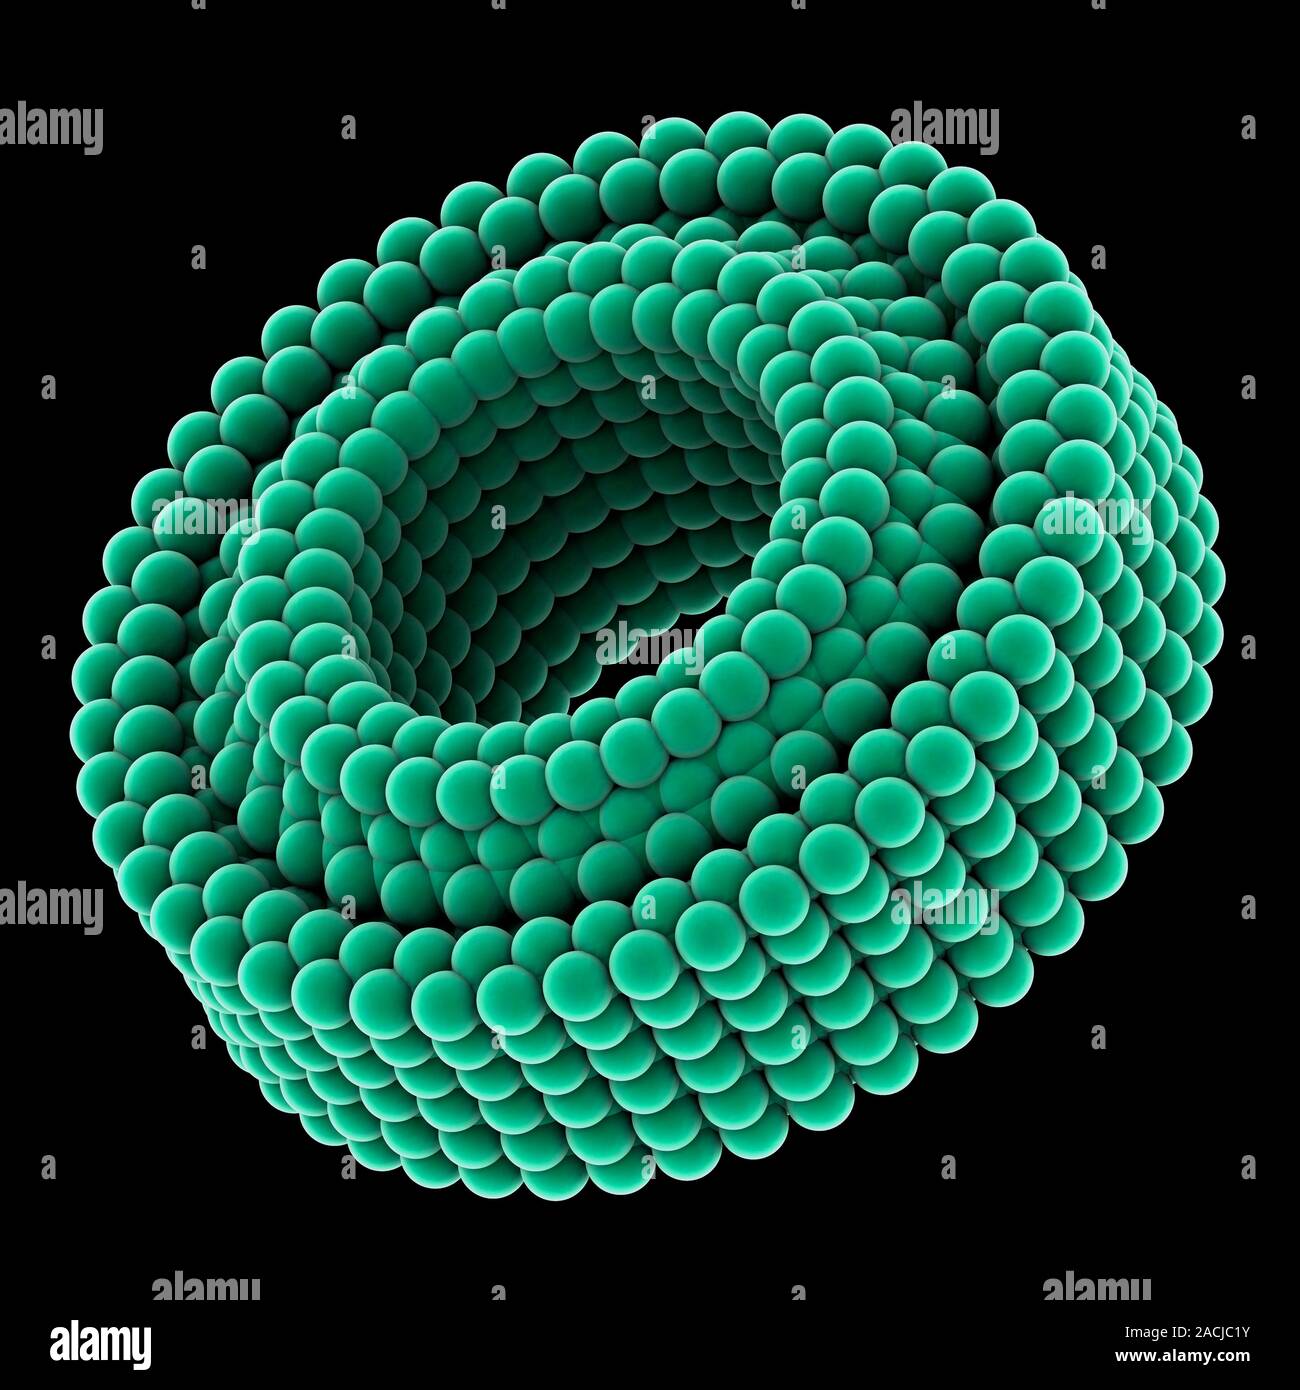 Artwork of a nano-bearing, a nanotechnology device created at the atomic scale. A bearing allows motion between two or more parts, and here one circul Stock Photo